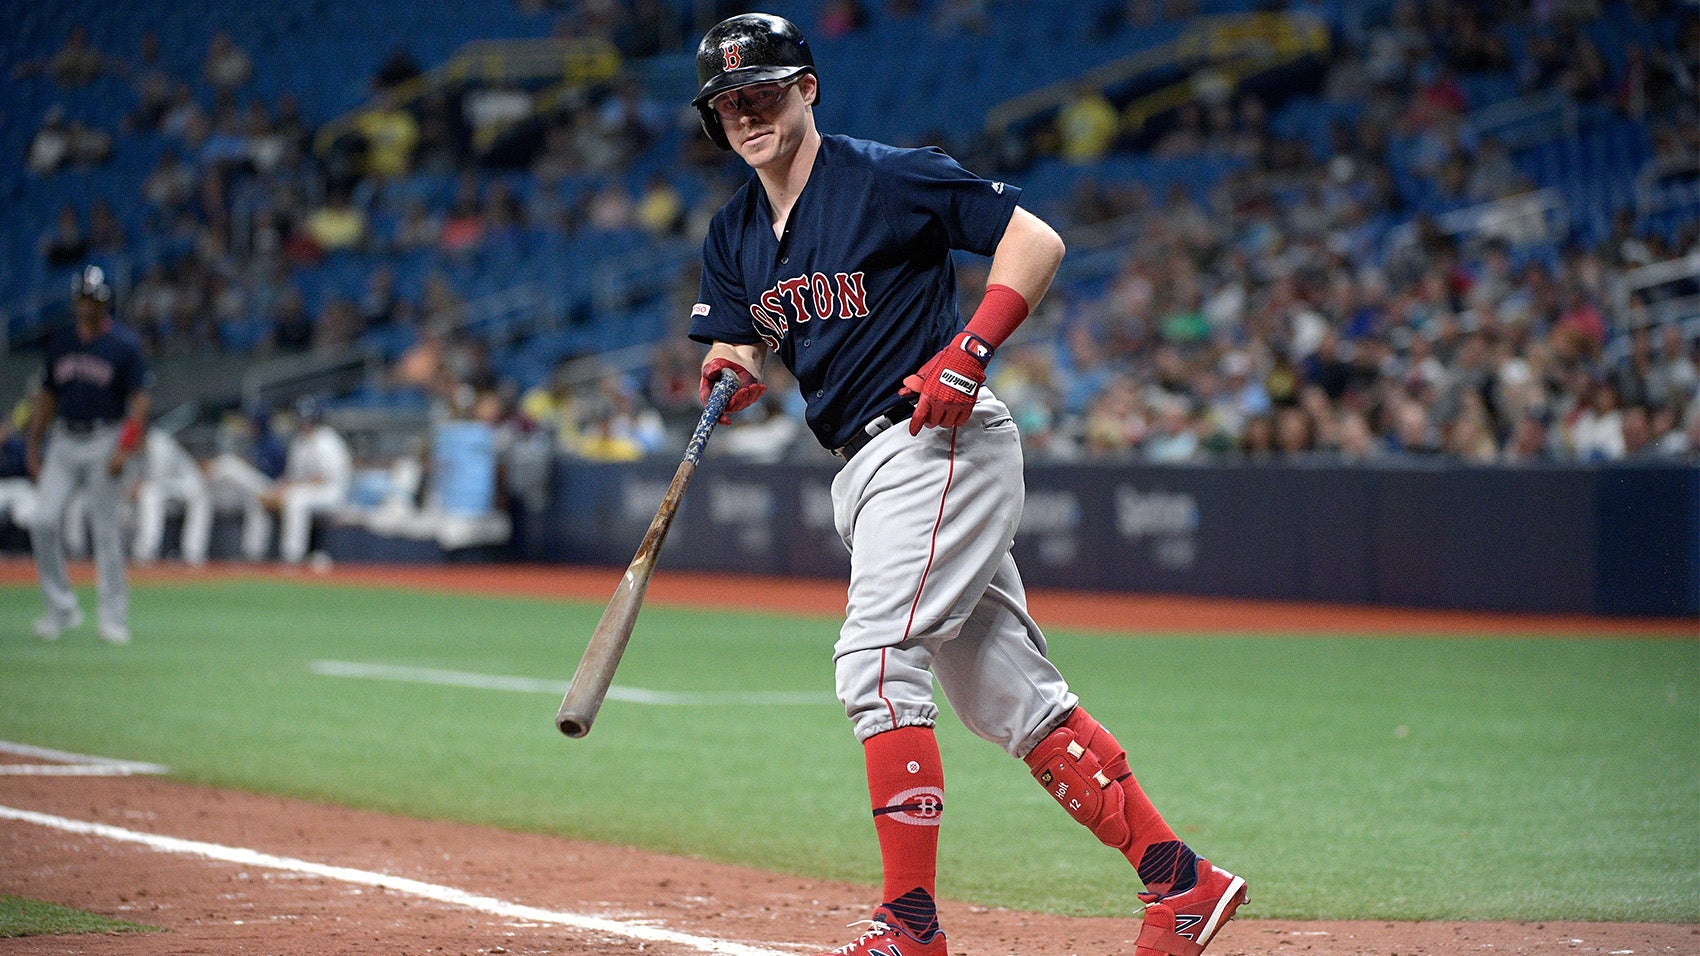 Brock Holt, former Red Sox utility player and fan favorite